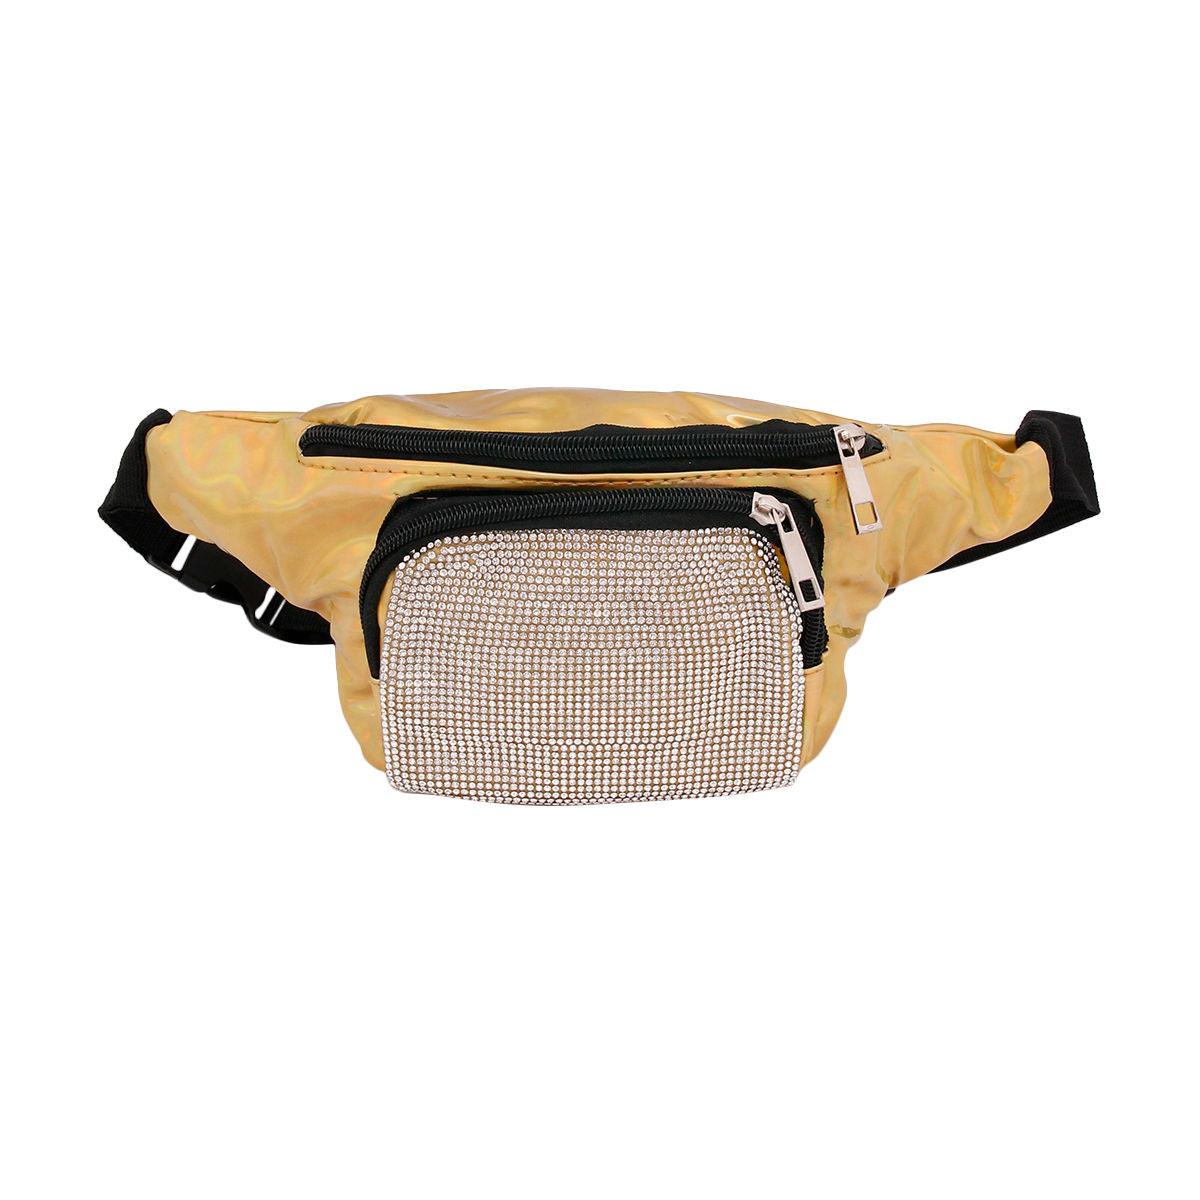 Rhinestone and Shiny Gold Patent Faux Leather Waist Bag Fanny Pack